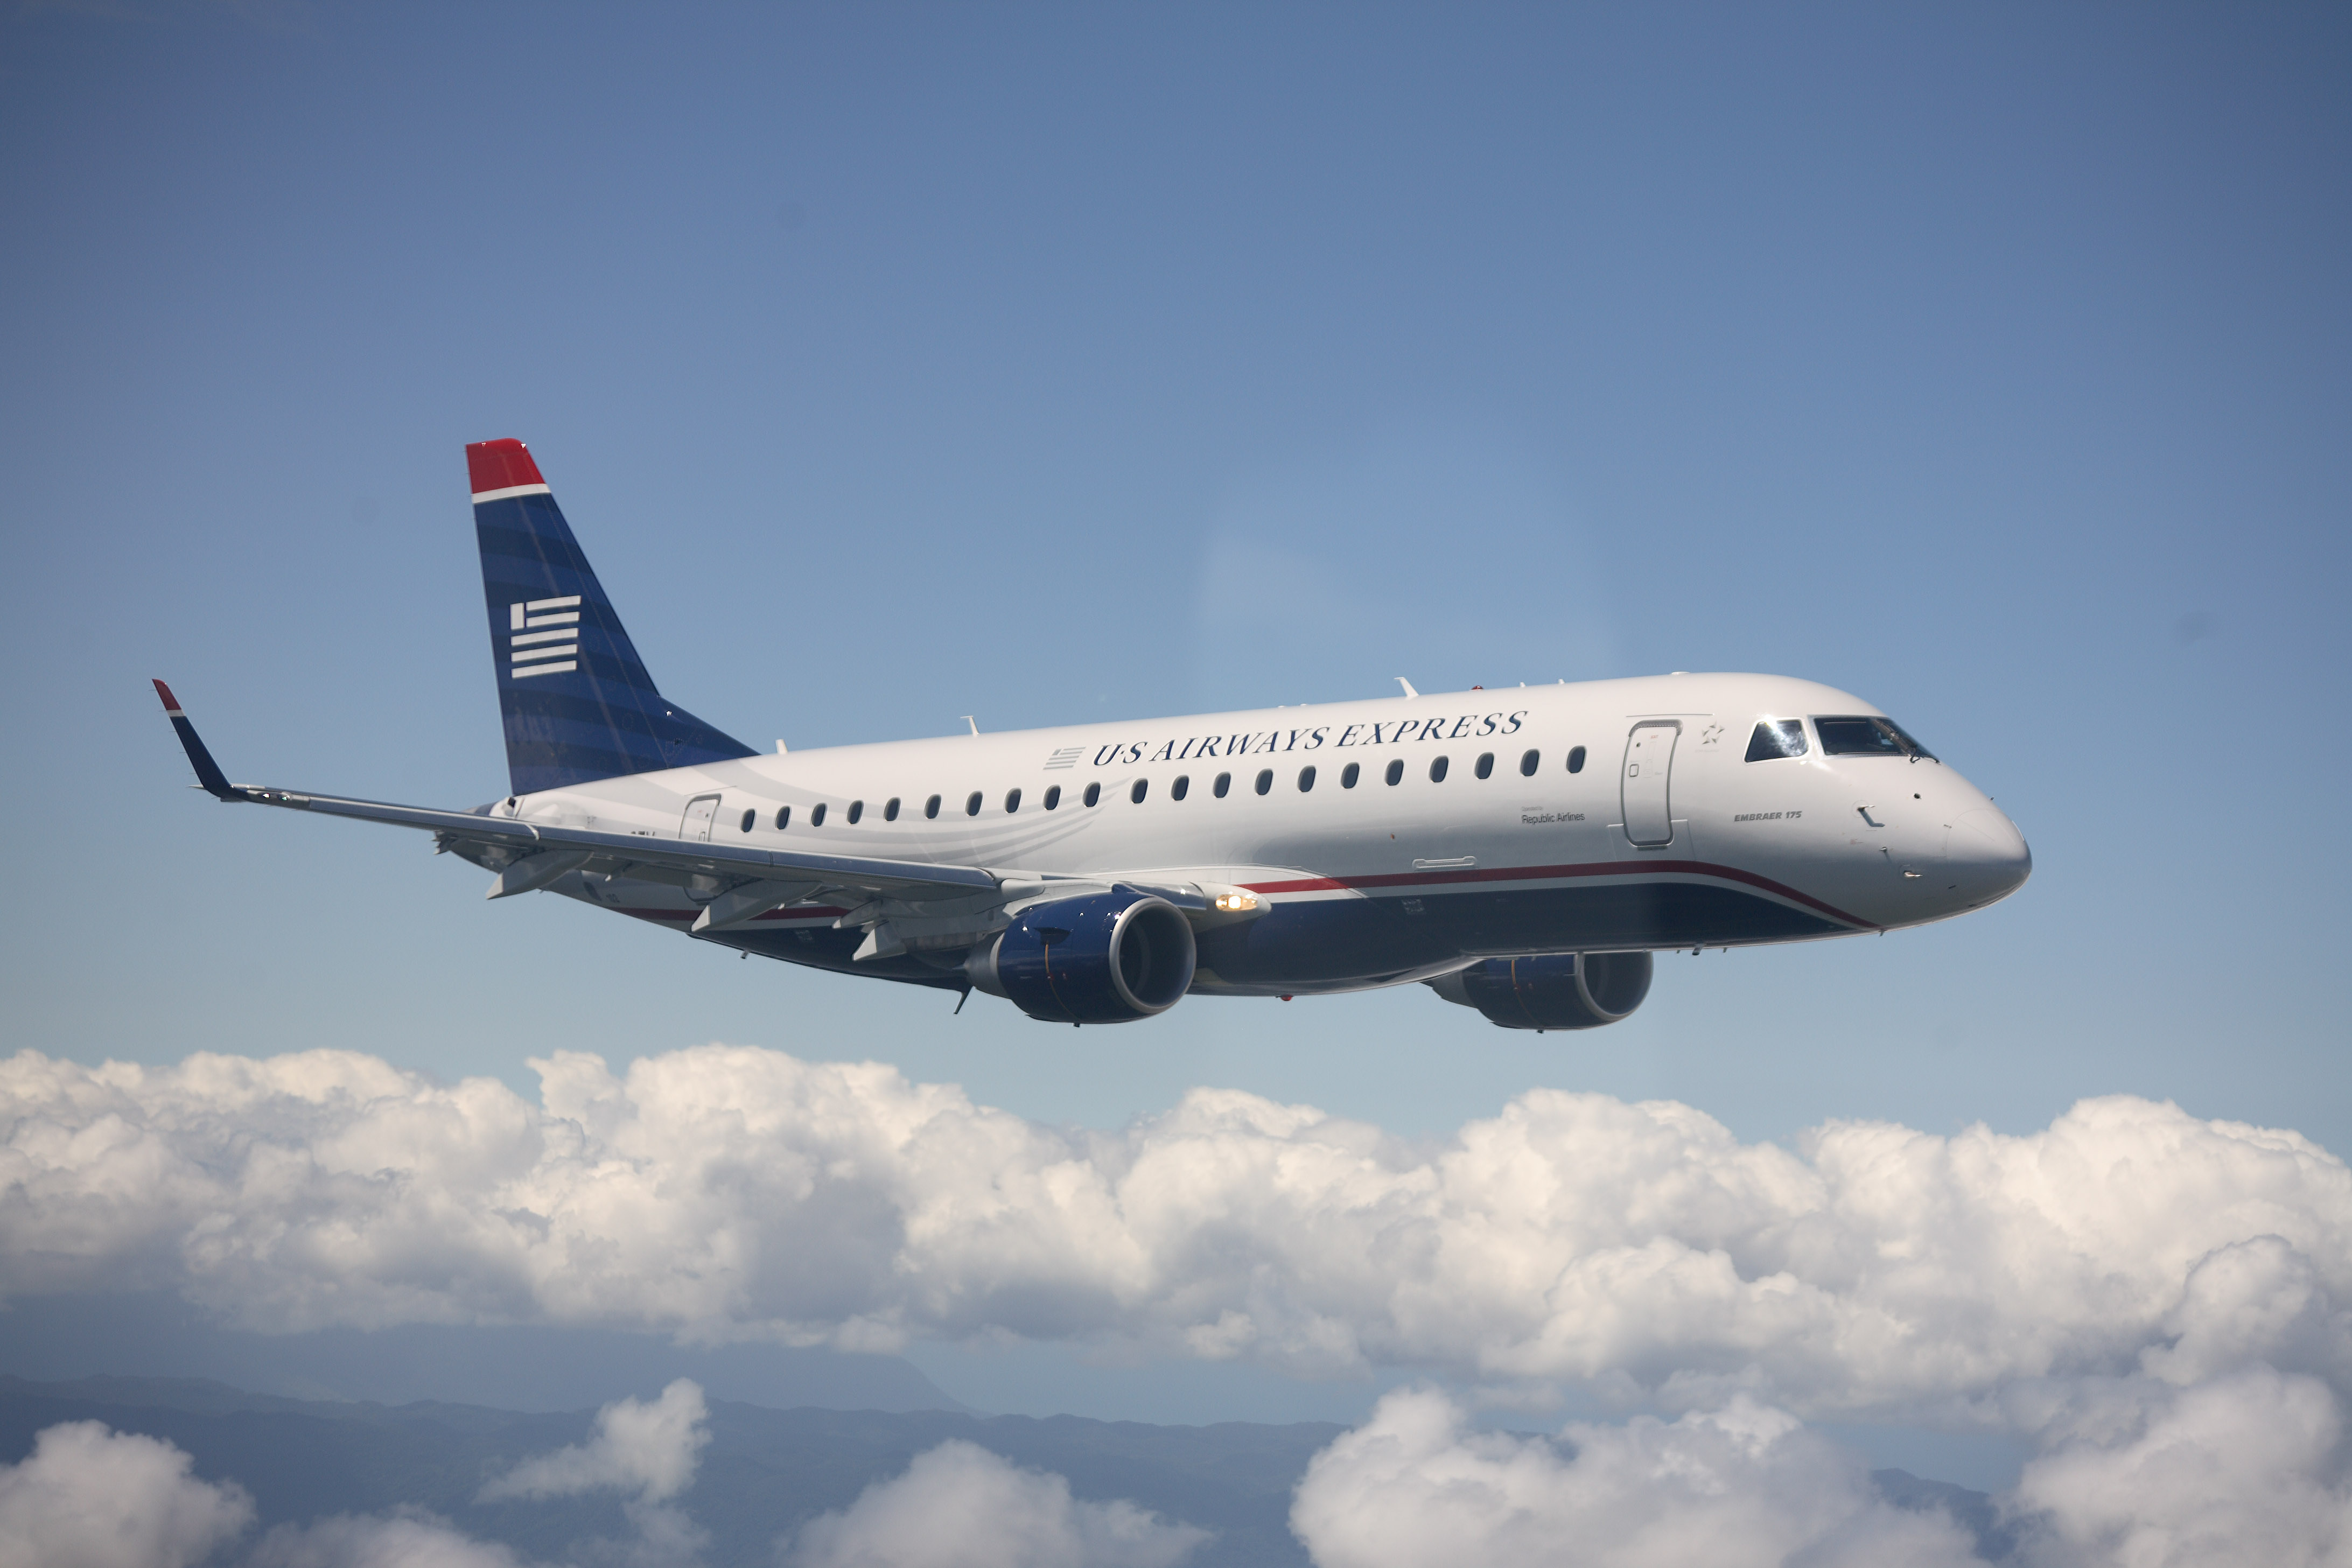 Why I won’t fly US Airways until the merger integration is complete